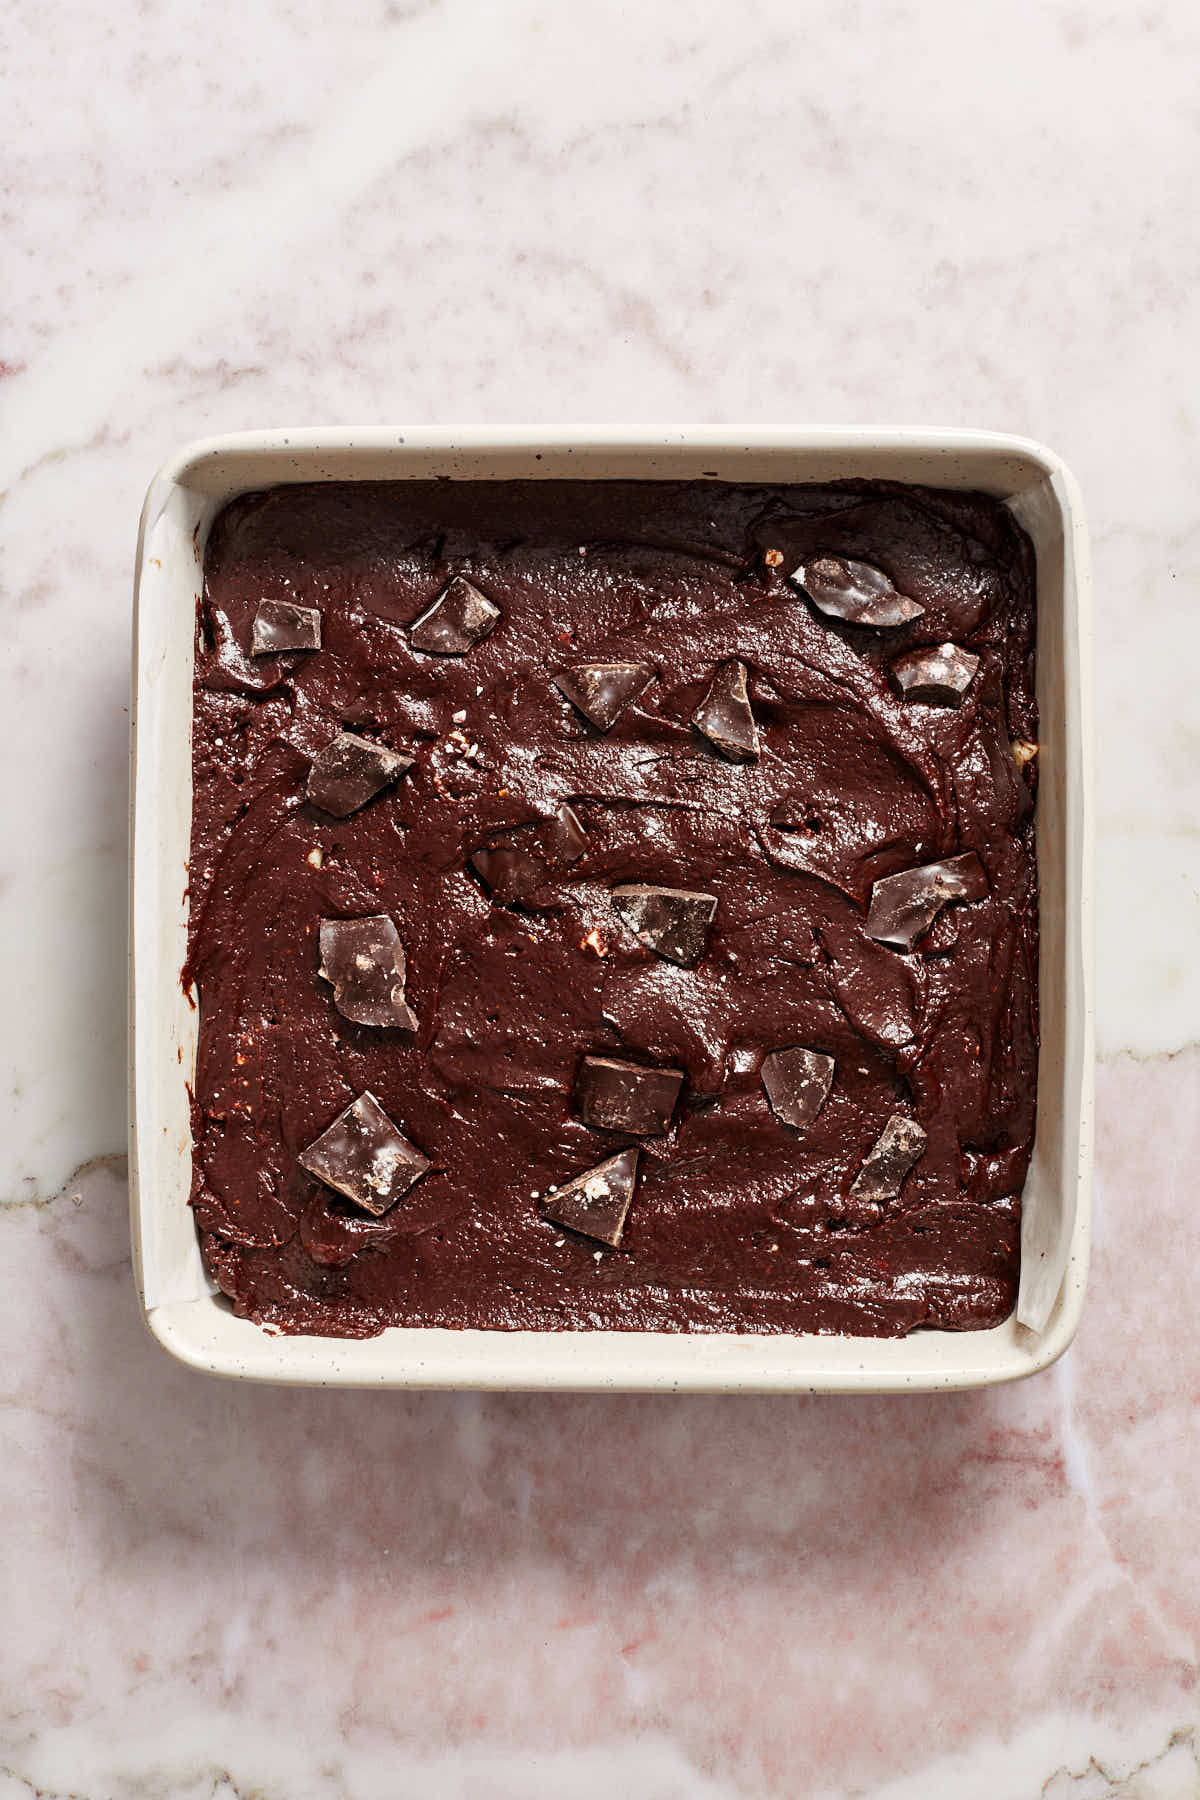 Brownie batter spread out in prepared pan with peppermint bark pressed into the top.